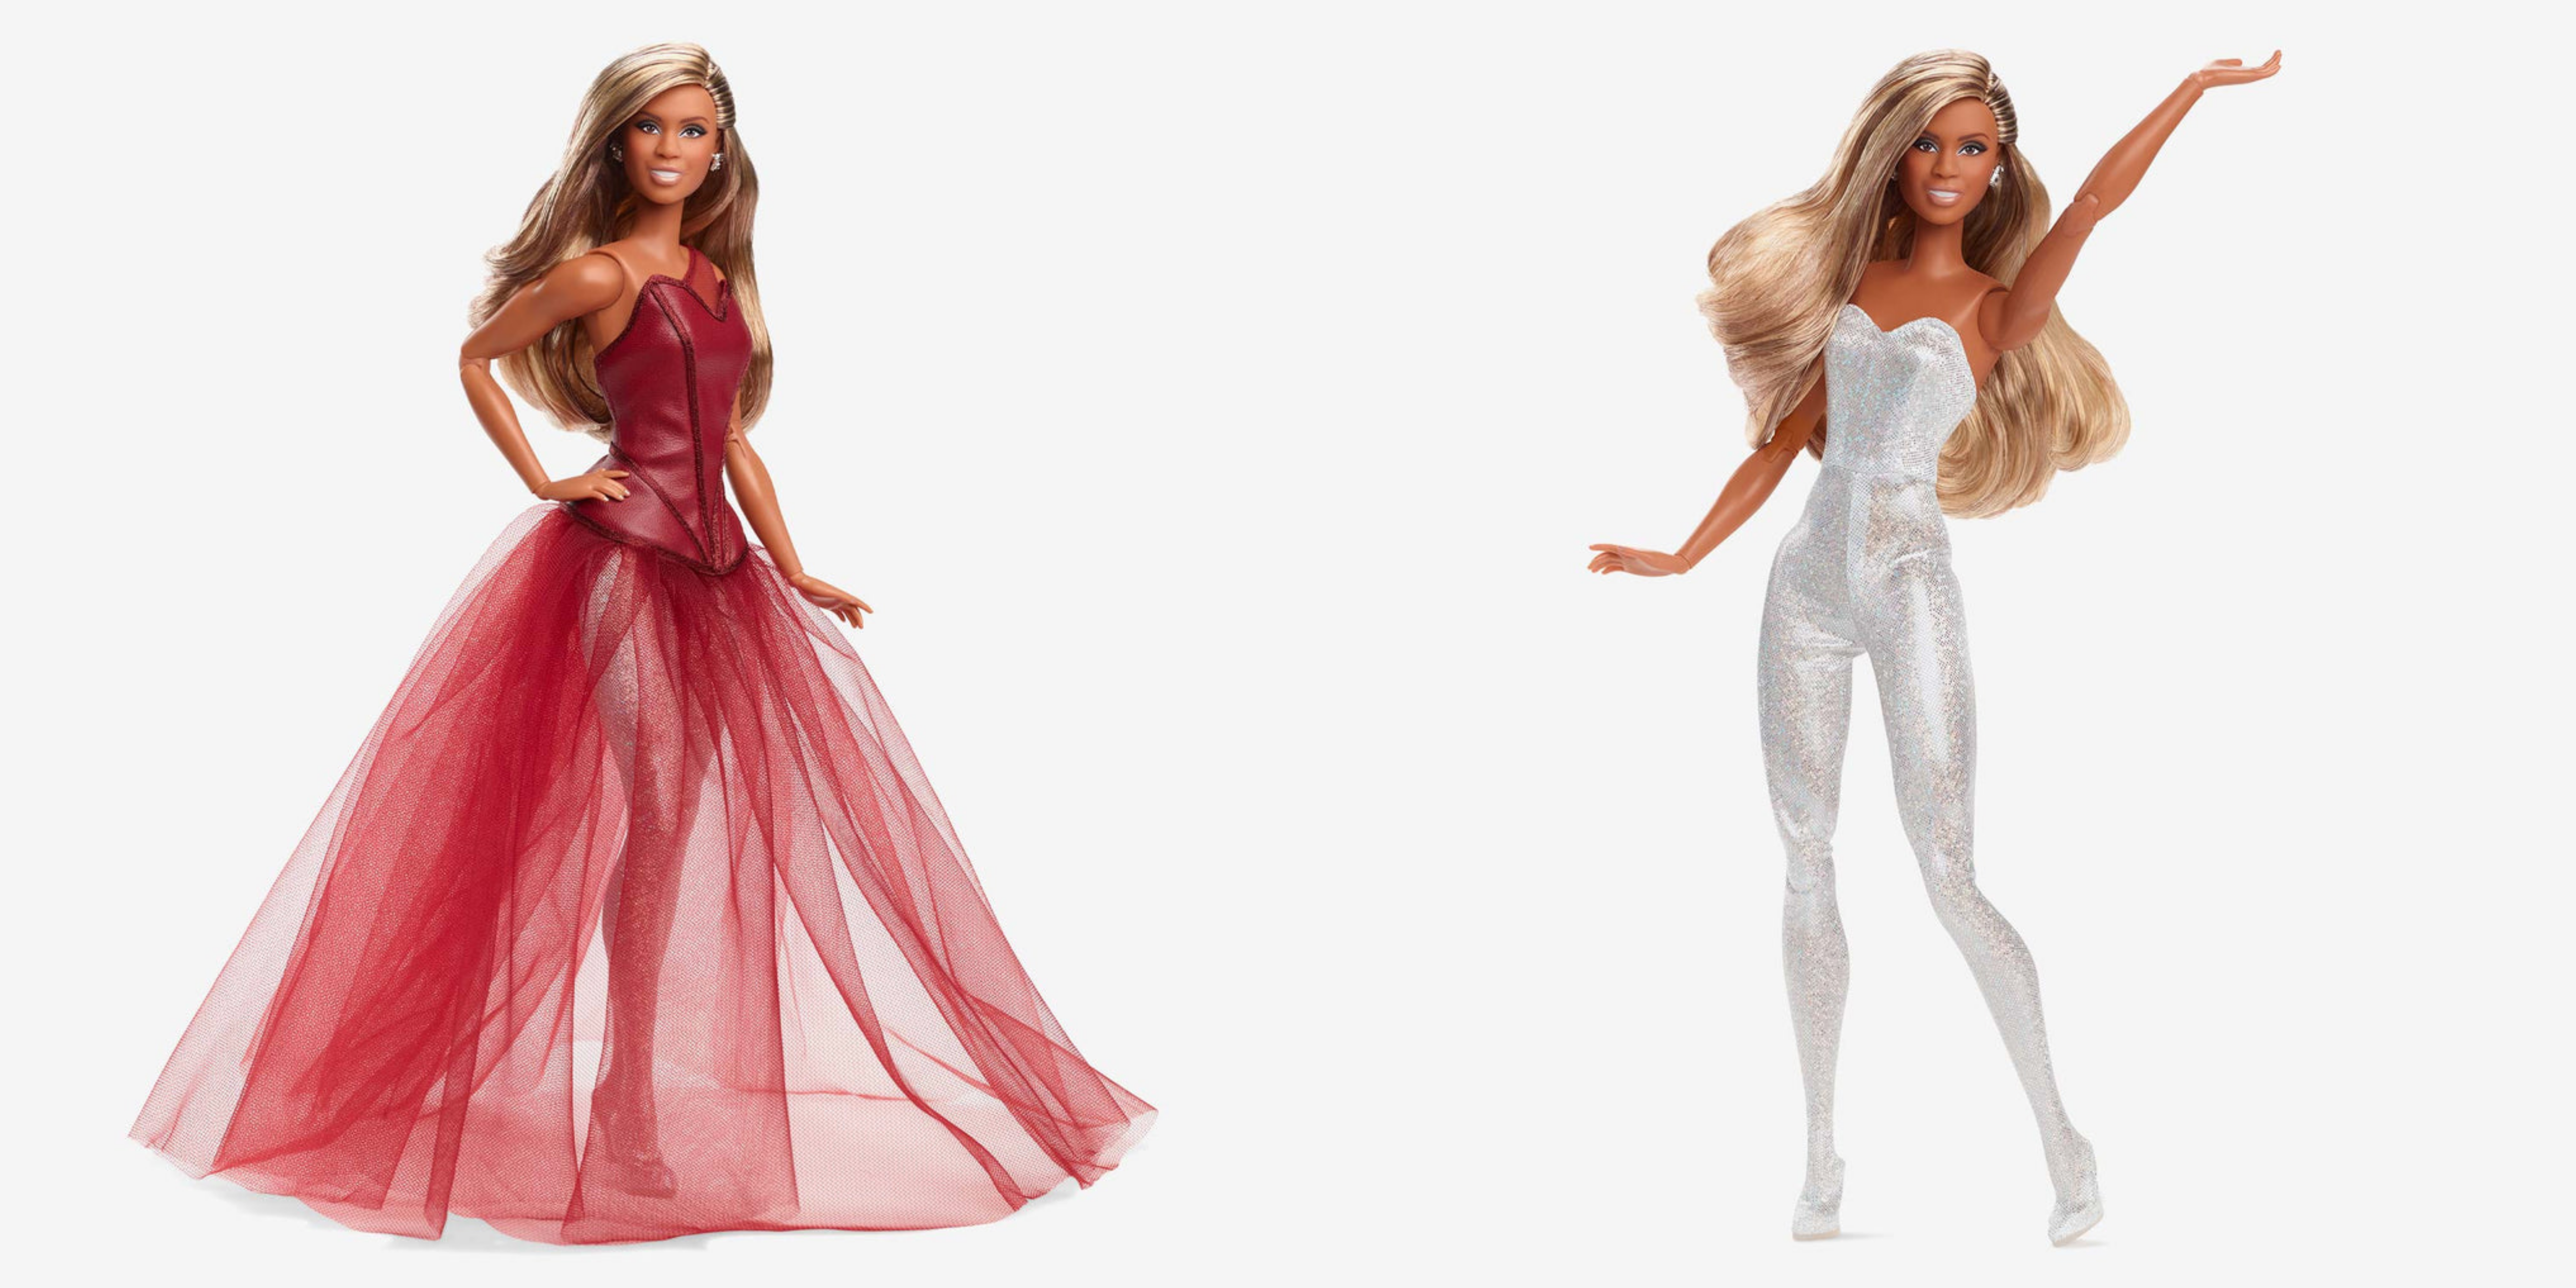 Laverne Cox Proudly Celebrates Her 50th Birthday As Mattel’s First Transgender Barbie Doll